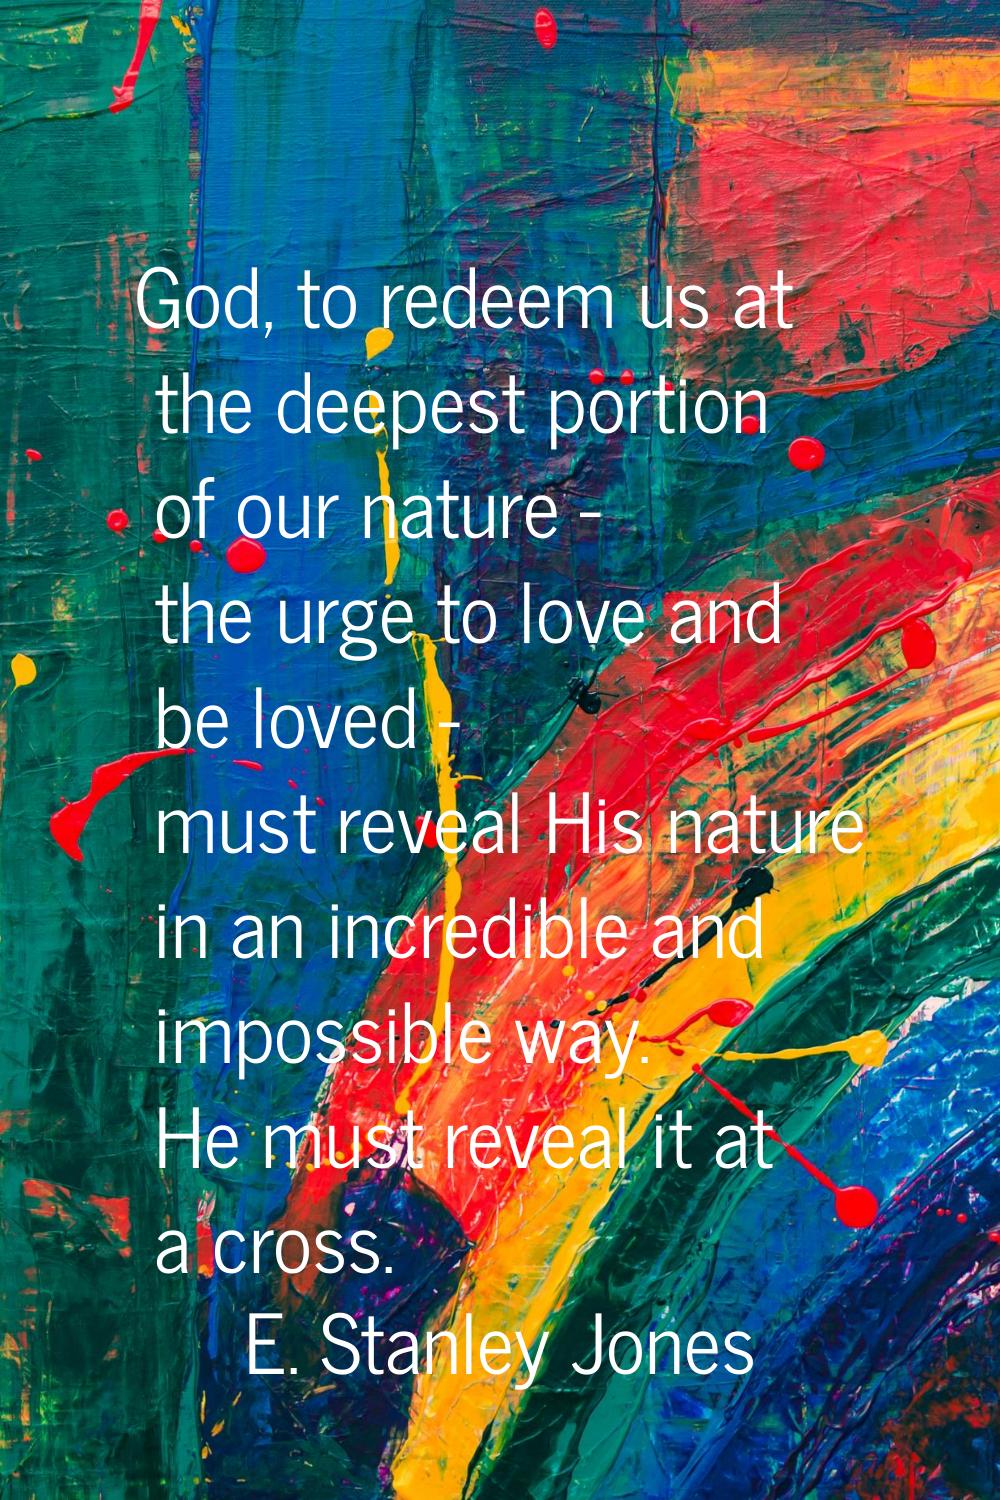 God, to redeem us at the deepest portion of our nature - the urge to love and be loved - must revea